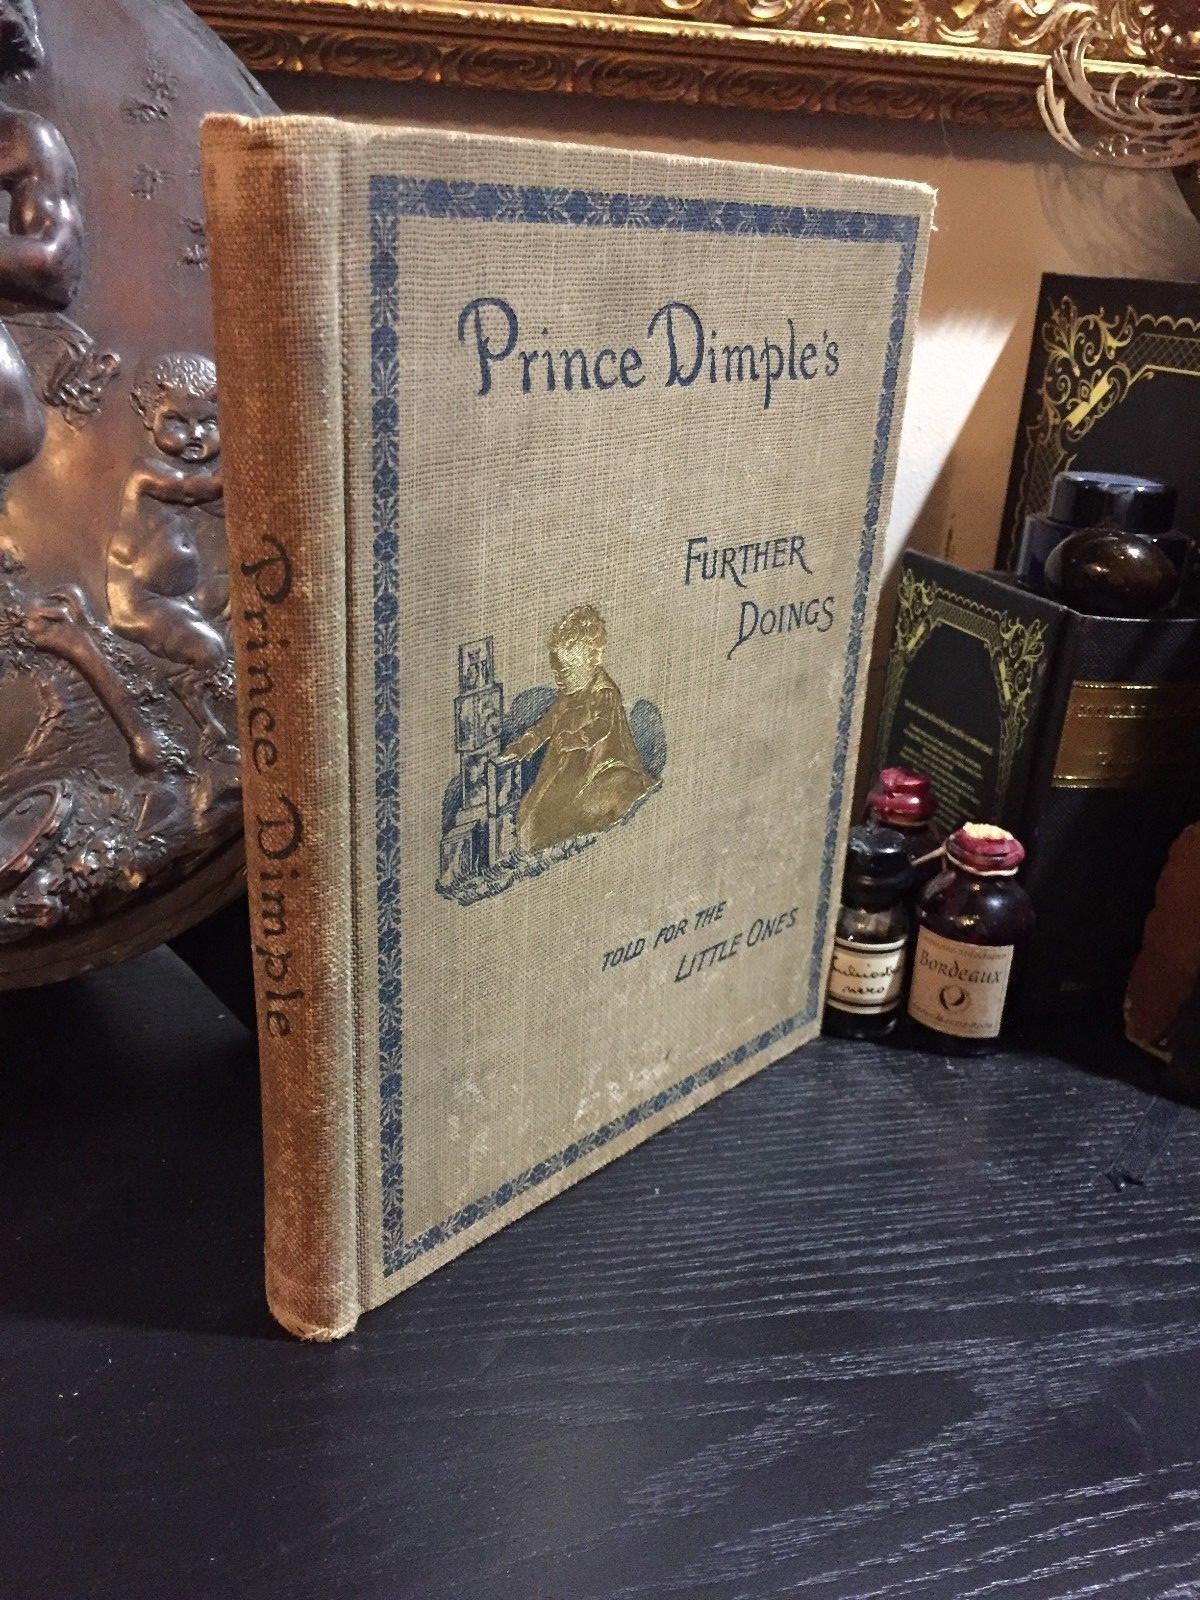 Prince Dimple Further Doings, Mrs. George A. Paull, Illustrated by Author, 1891